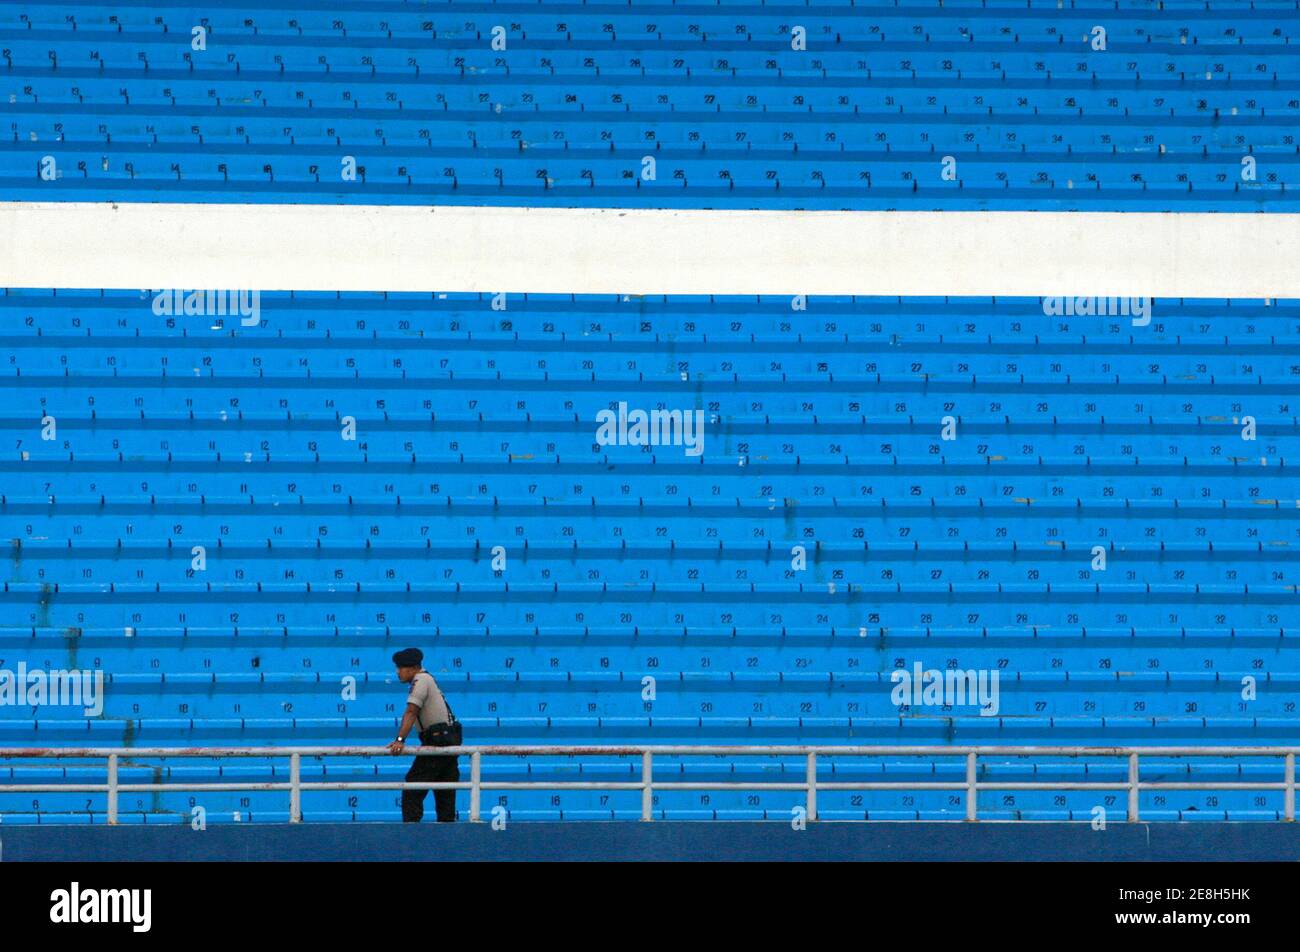 A police officer stands guard during a match between Saudi Arabia and Bahrain at the 2007 AFC Asian Cup Group D soccer match in Palembang July 18, 2007.  REUTERS/Beawiharta   (INDONESIA) Stock Photo